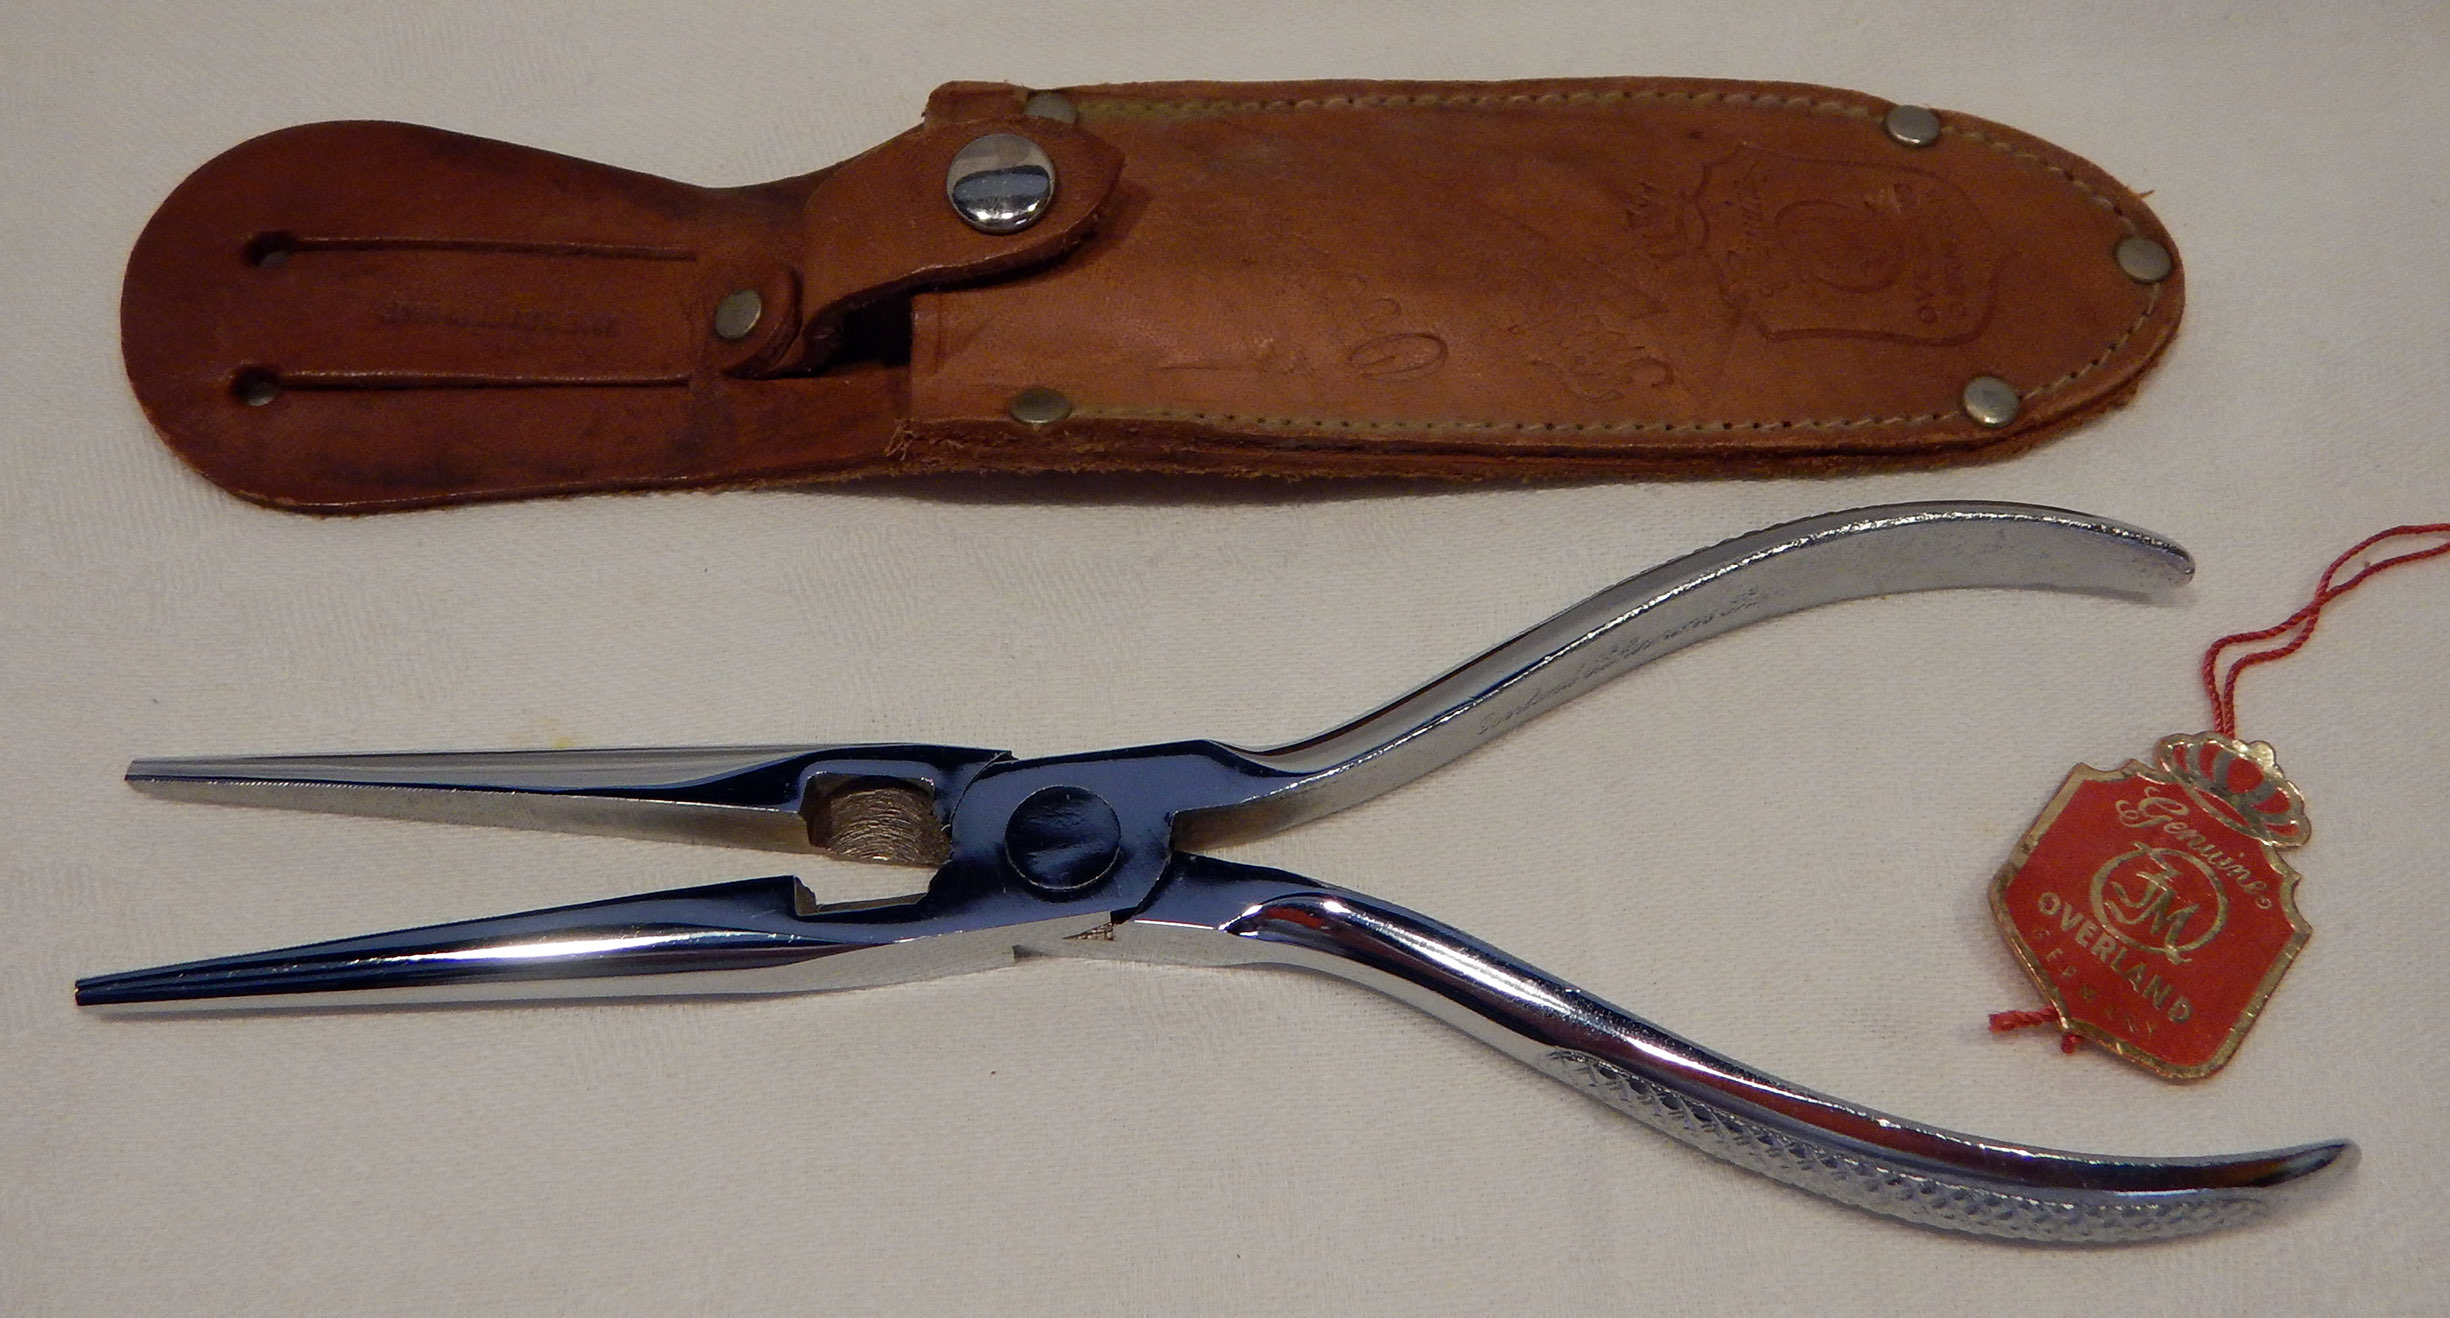 History of Pliers: The Long Journey of Your Two-Tailed Friend!